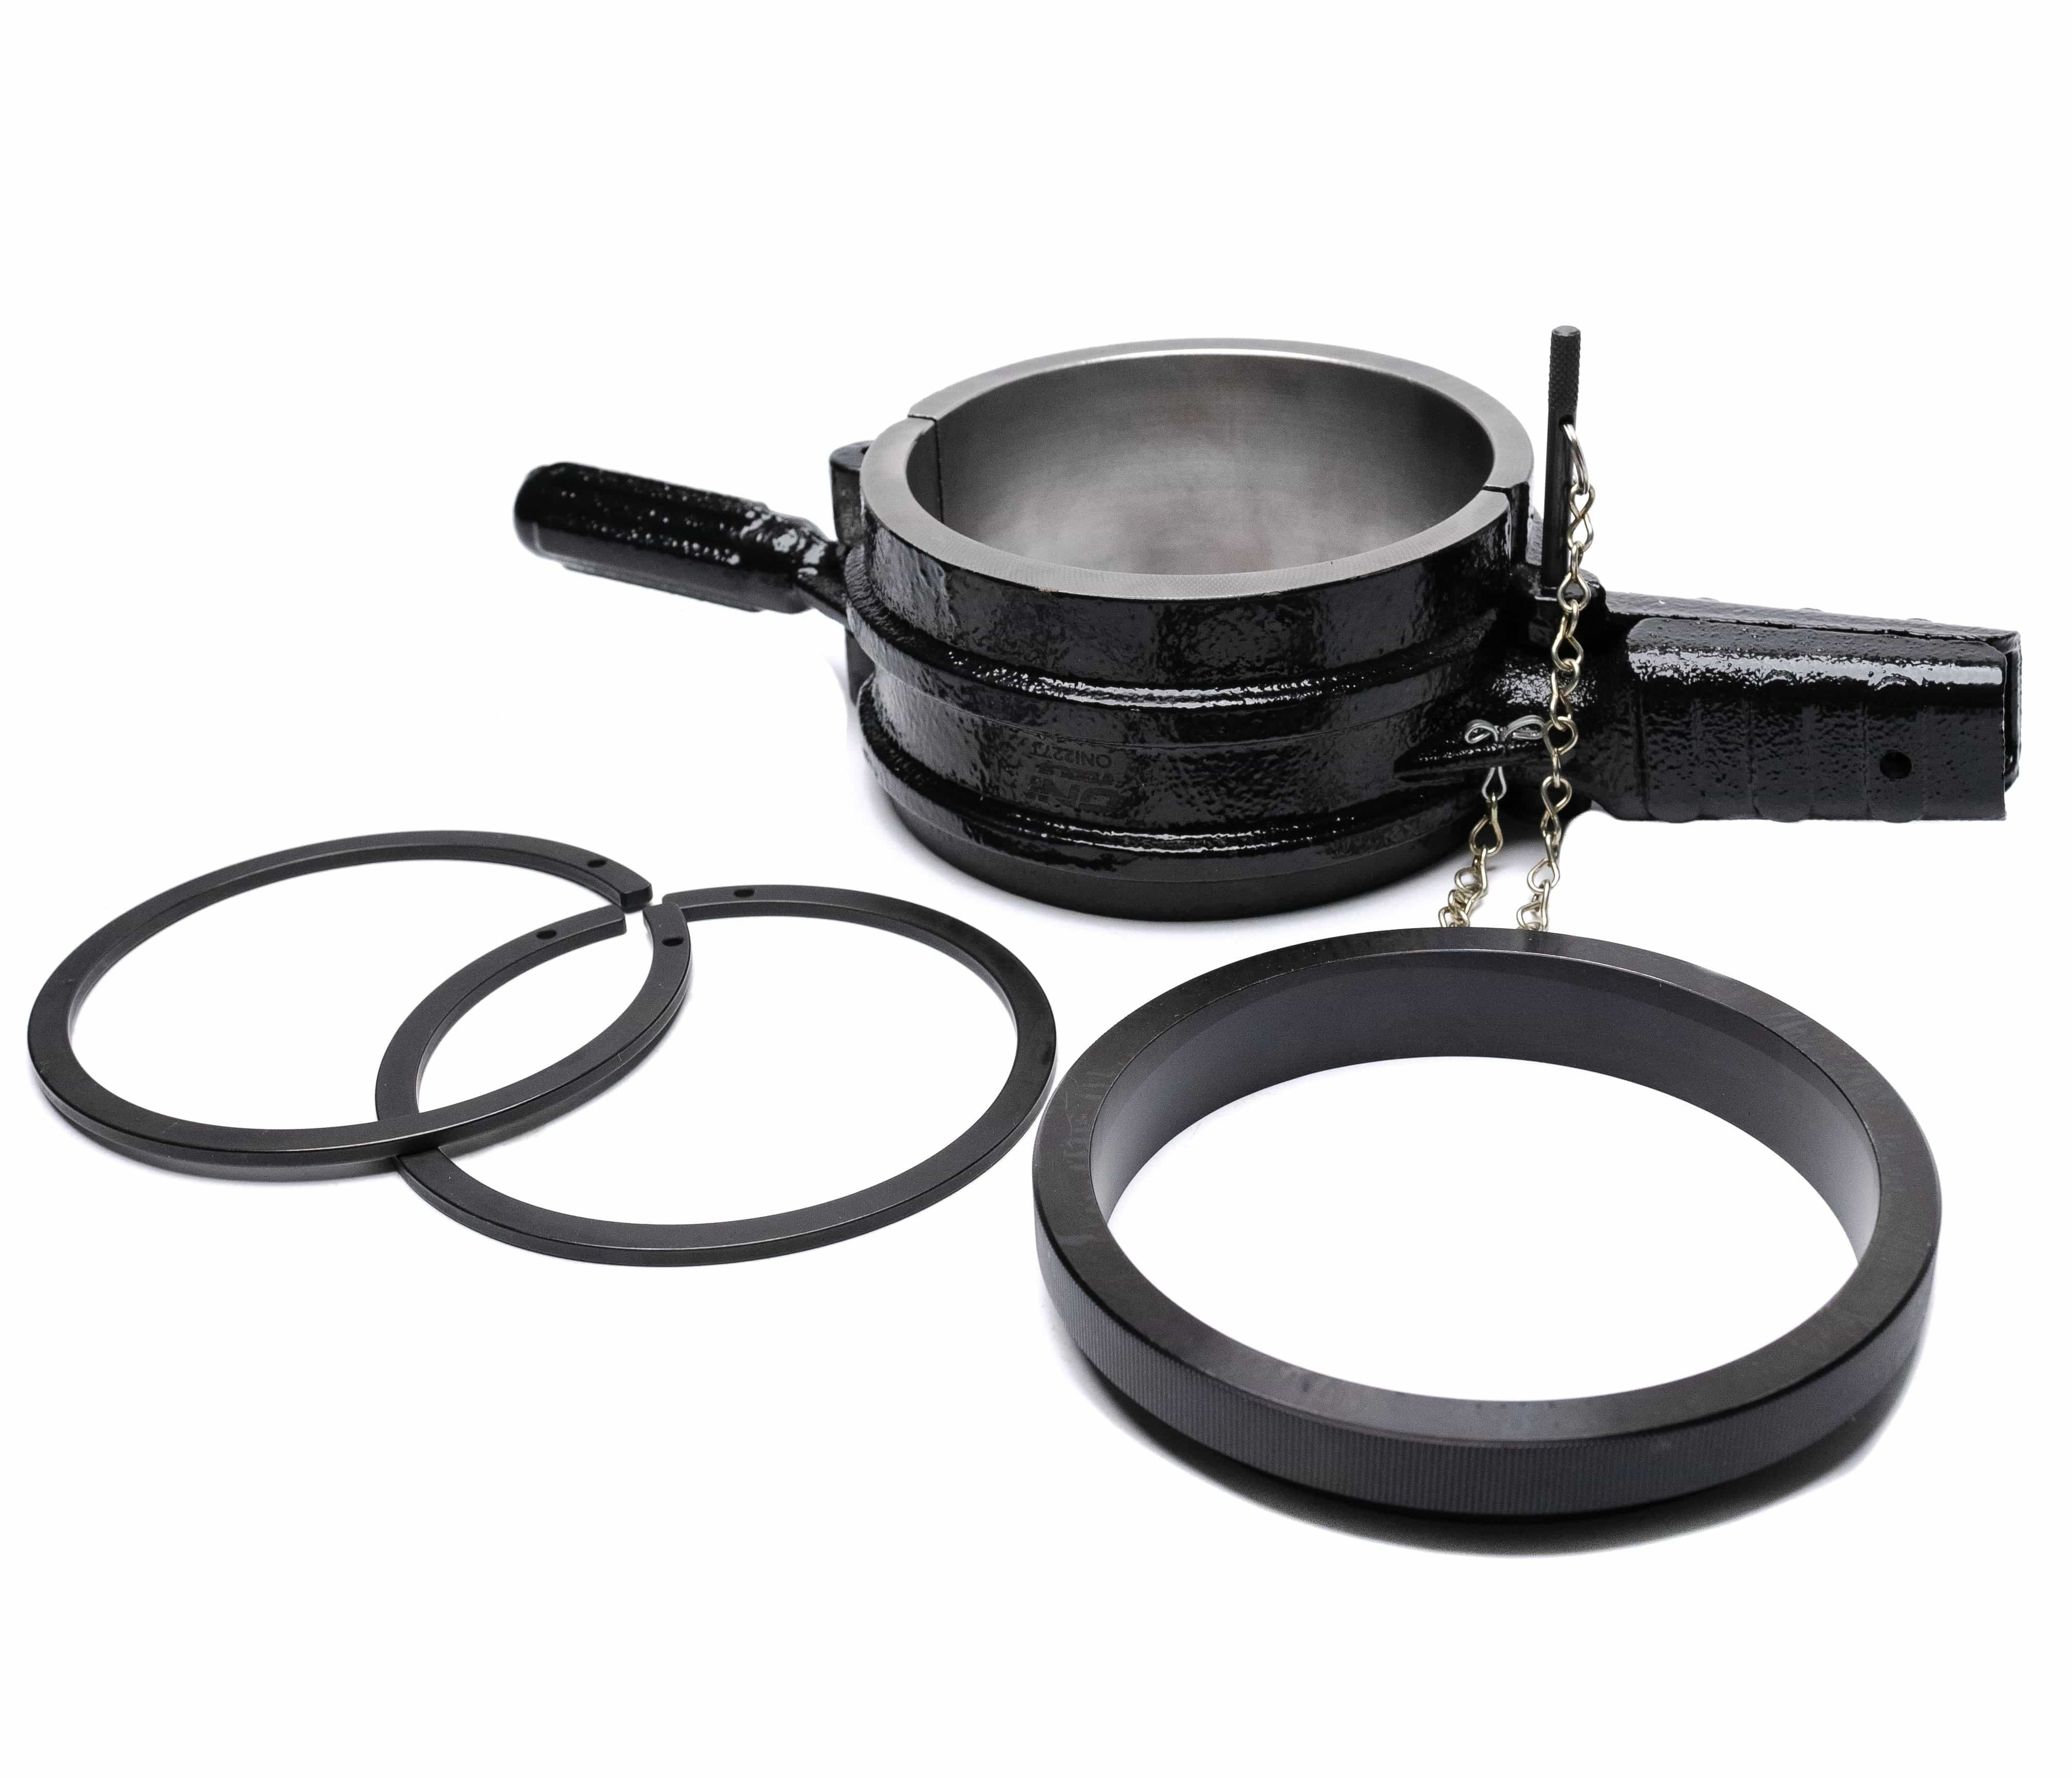 and CAT C15 5.4 Bore 5299447 Piston Ring Compressor Adapter and Anti-Polishing Ring Kit For Cummins ISX Caterpillar 3400 Alternative to 5299448 and 5299339 